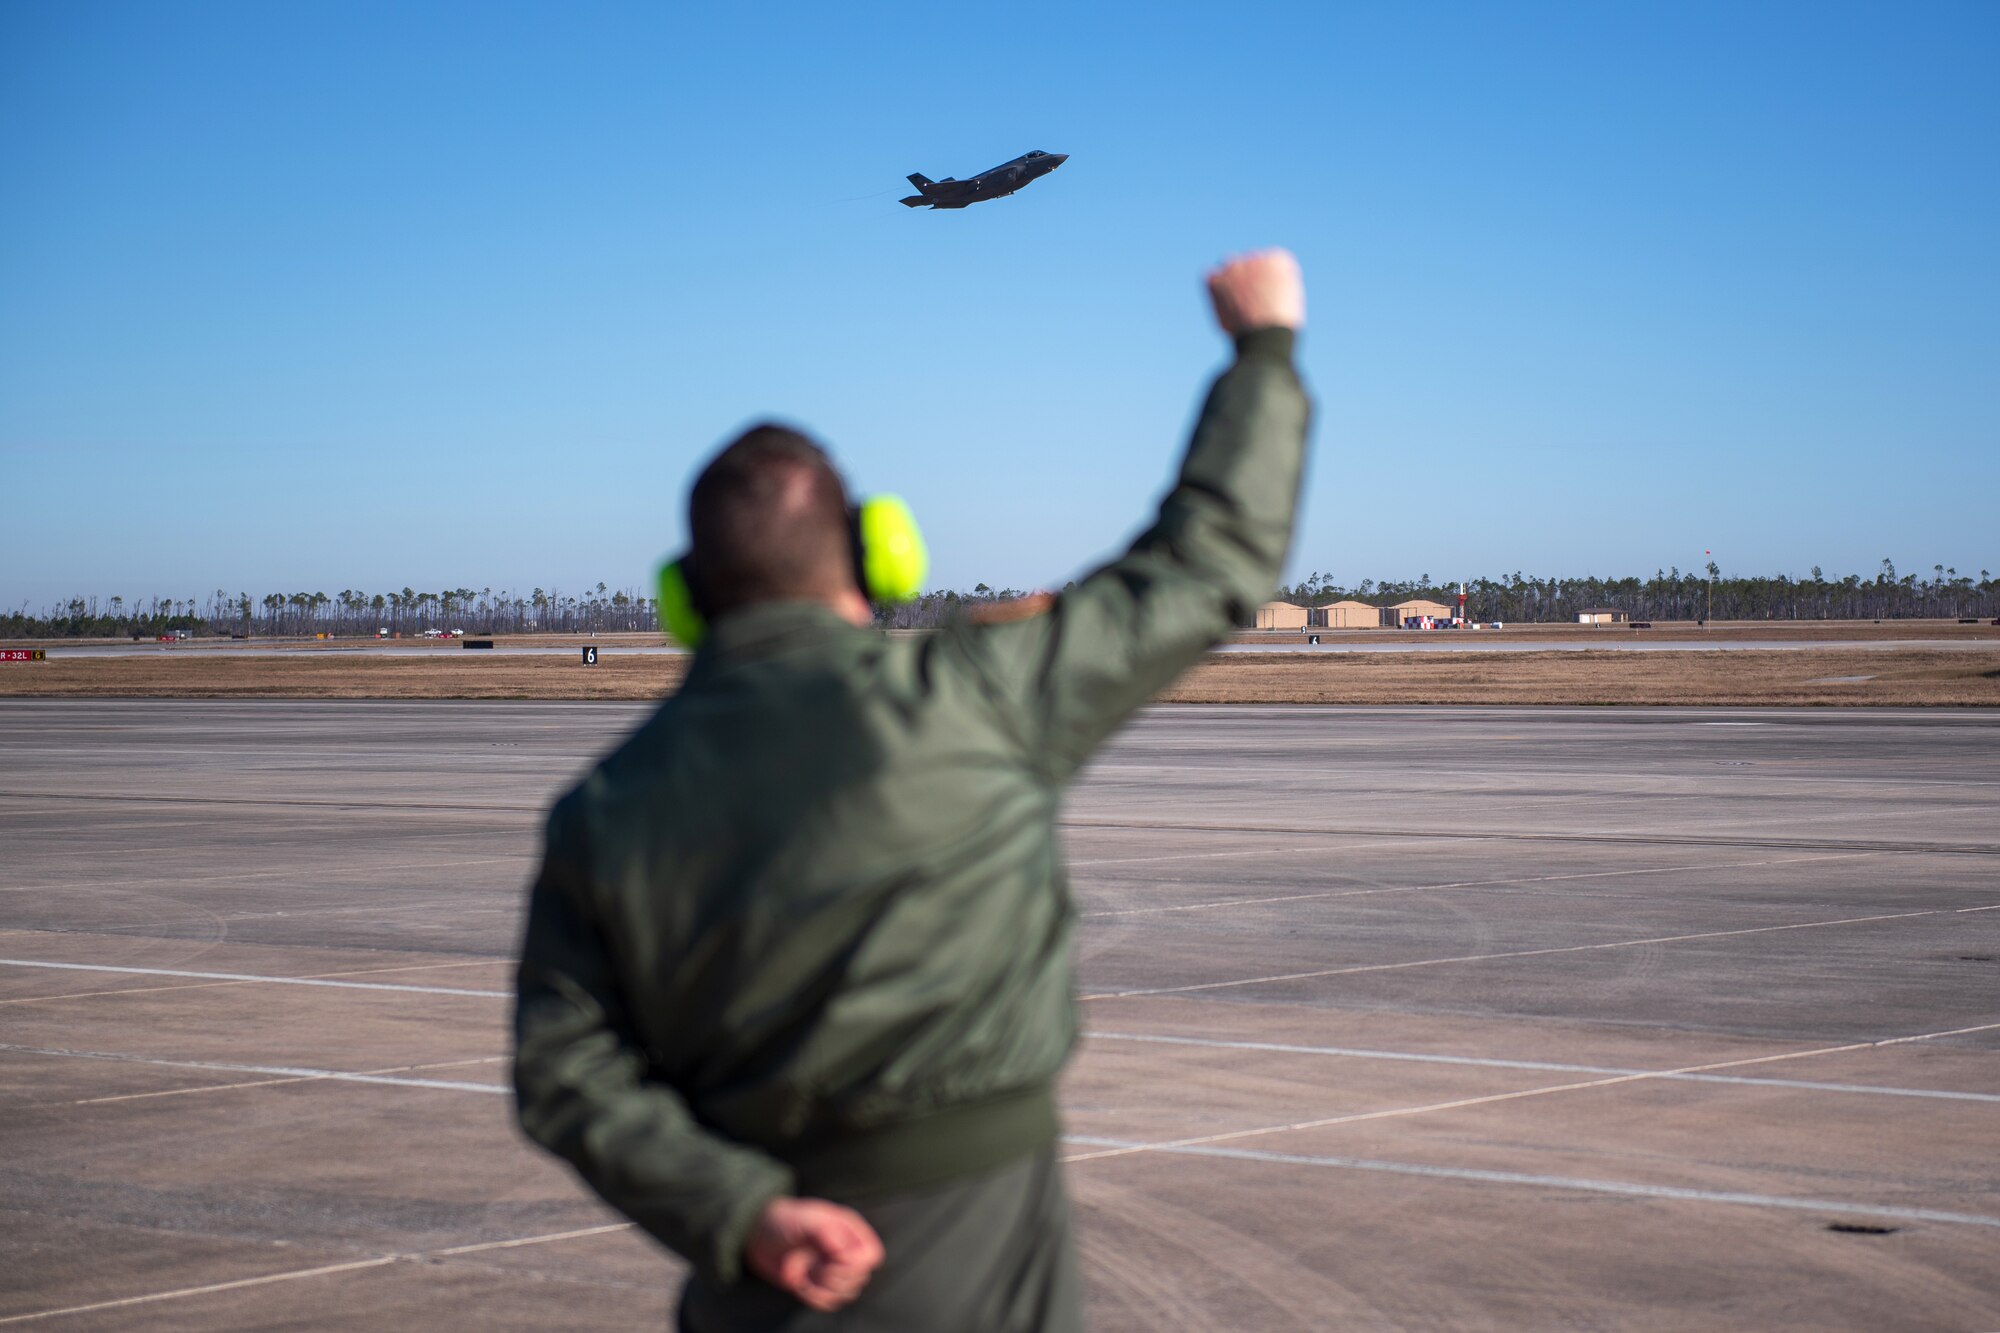 Brig. Gen. Henry Harder, assistant adjutant general - air, Vermont National Guard, watches an F-35 Lightning II take off from Tyndall Air Force Base